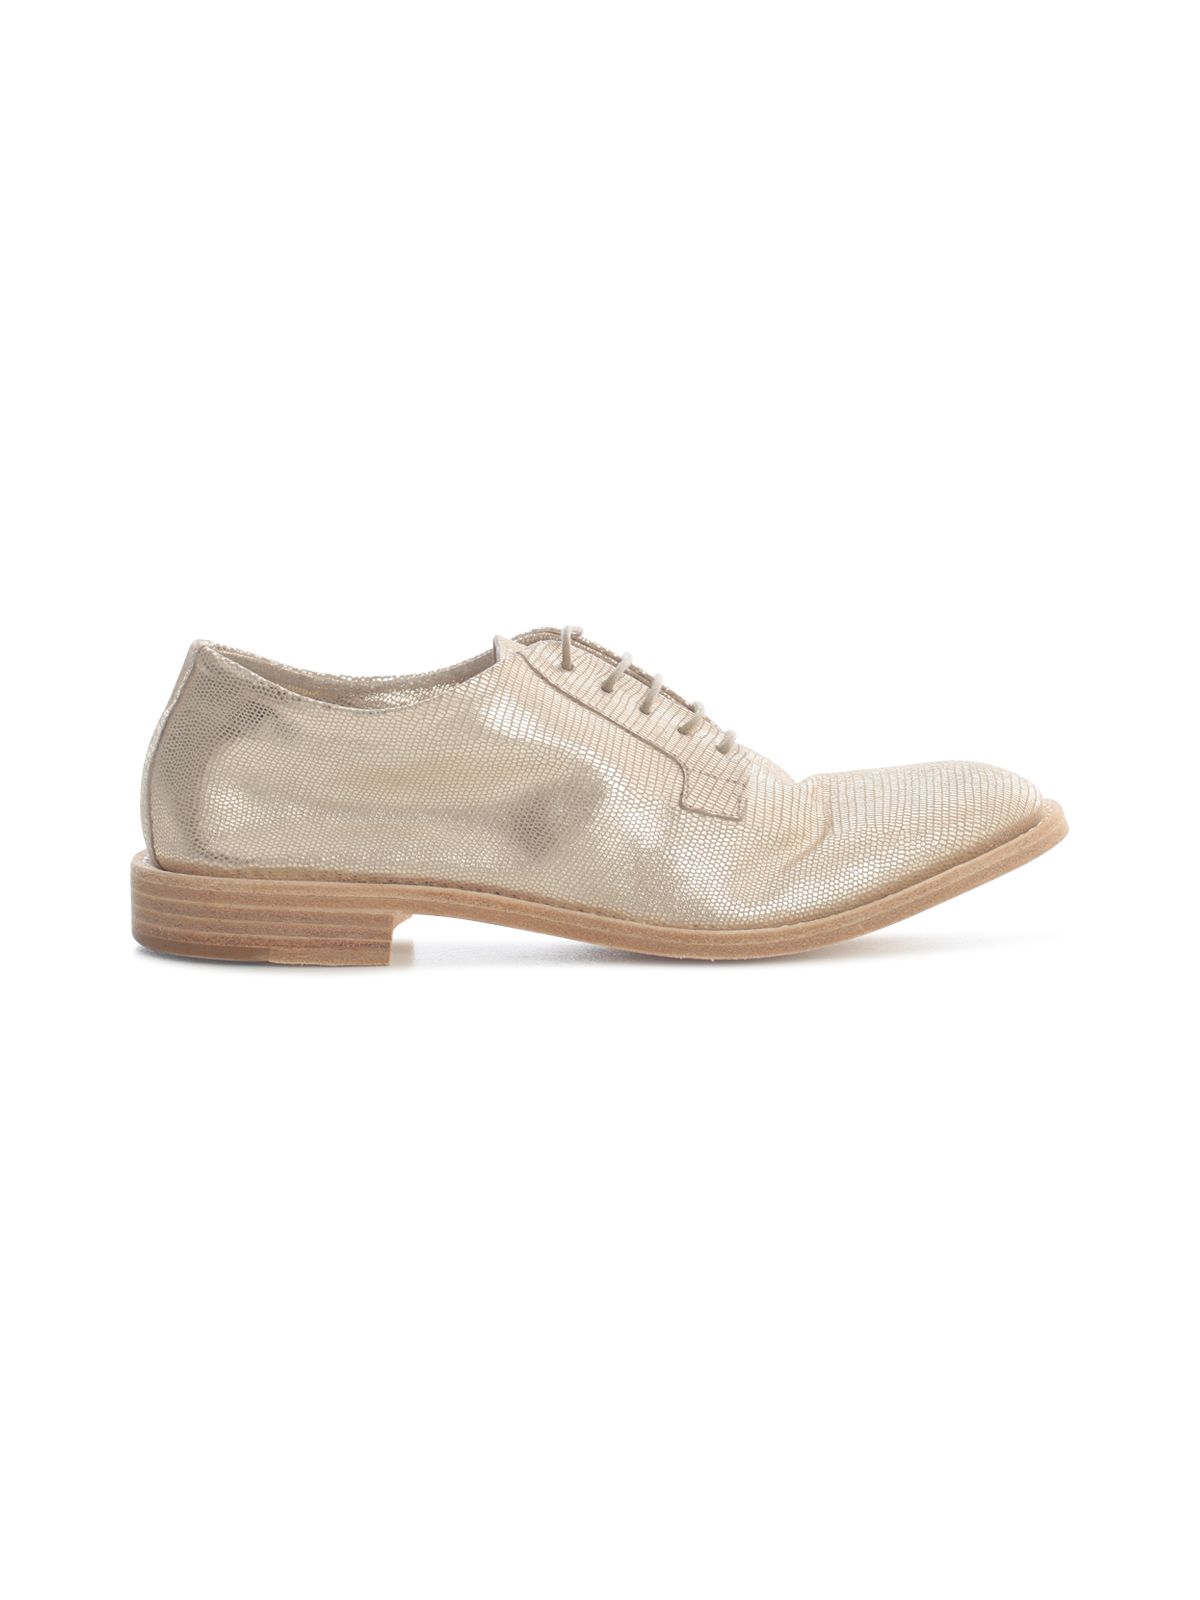 DEL CARLO METALLIC LACE UP SHOES